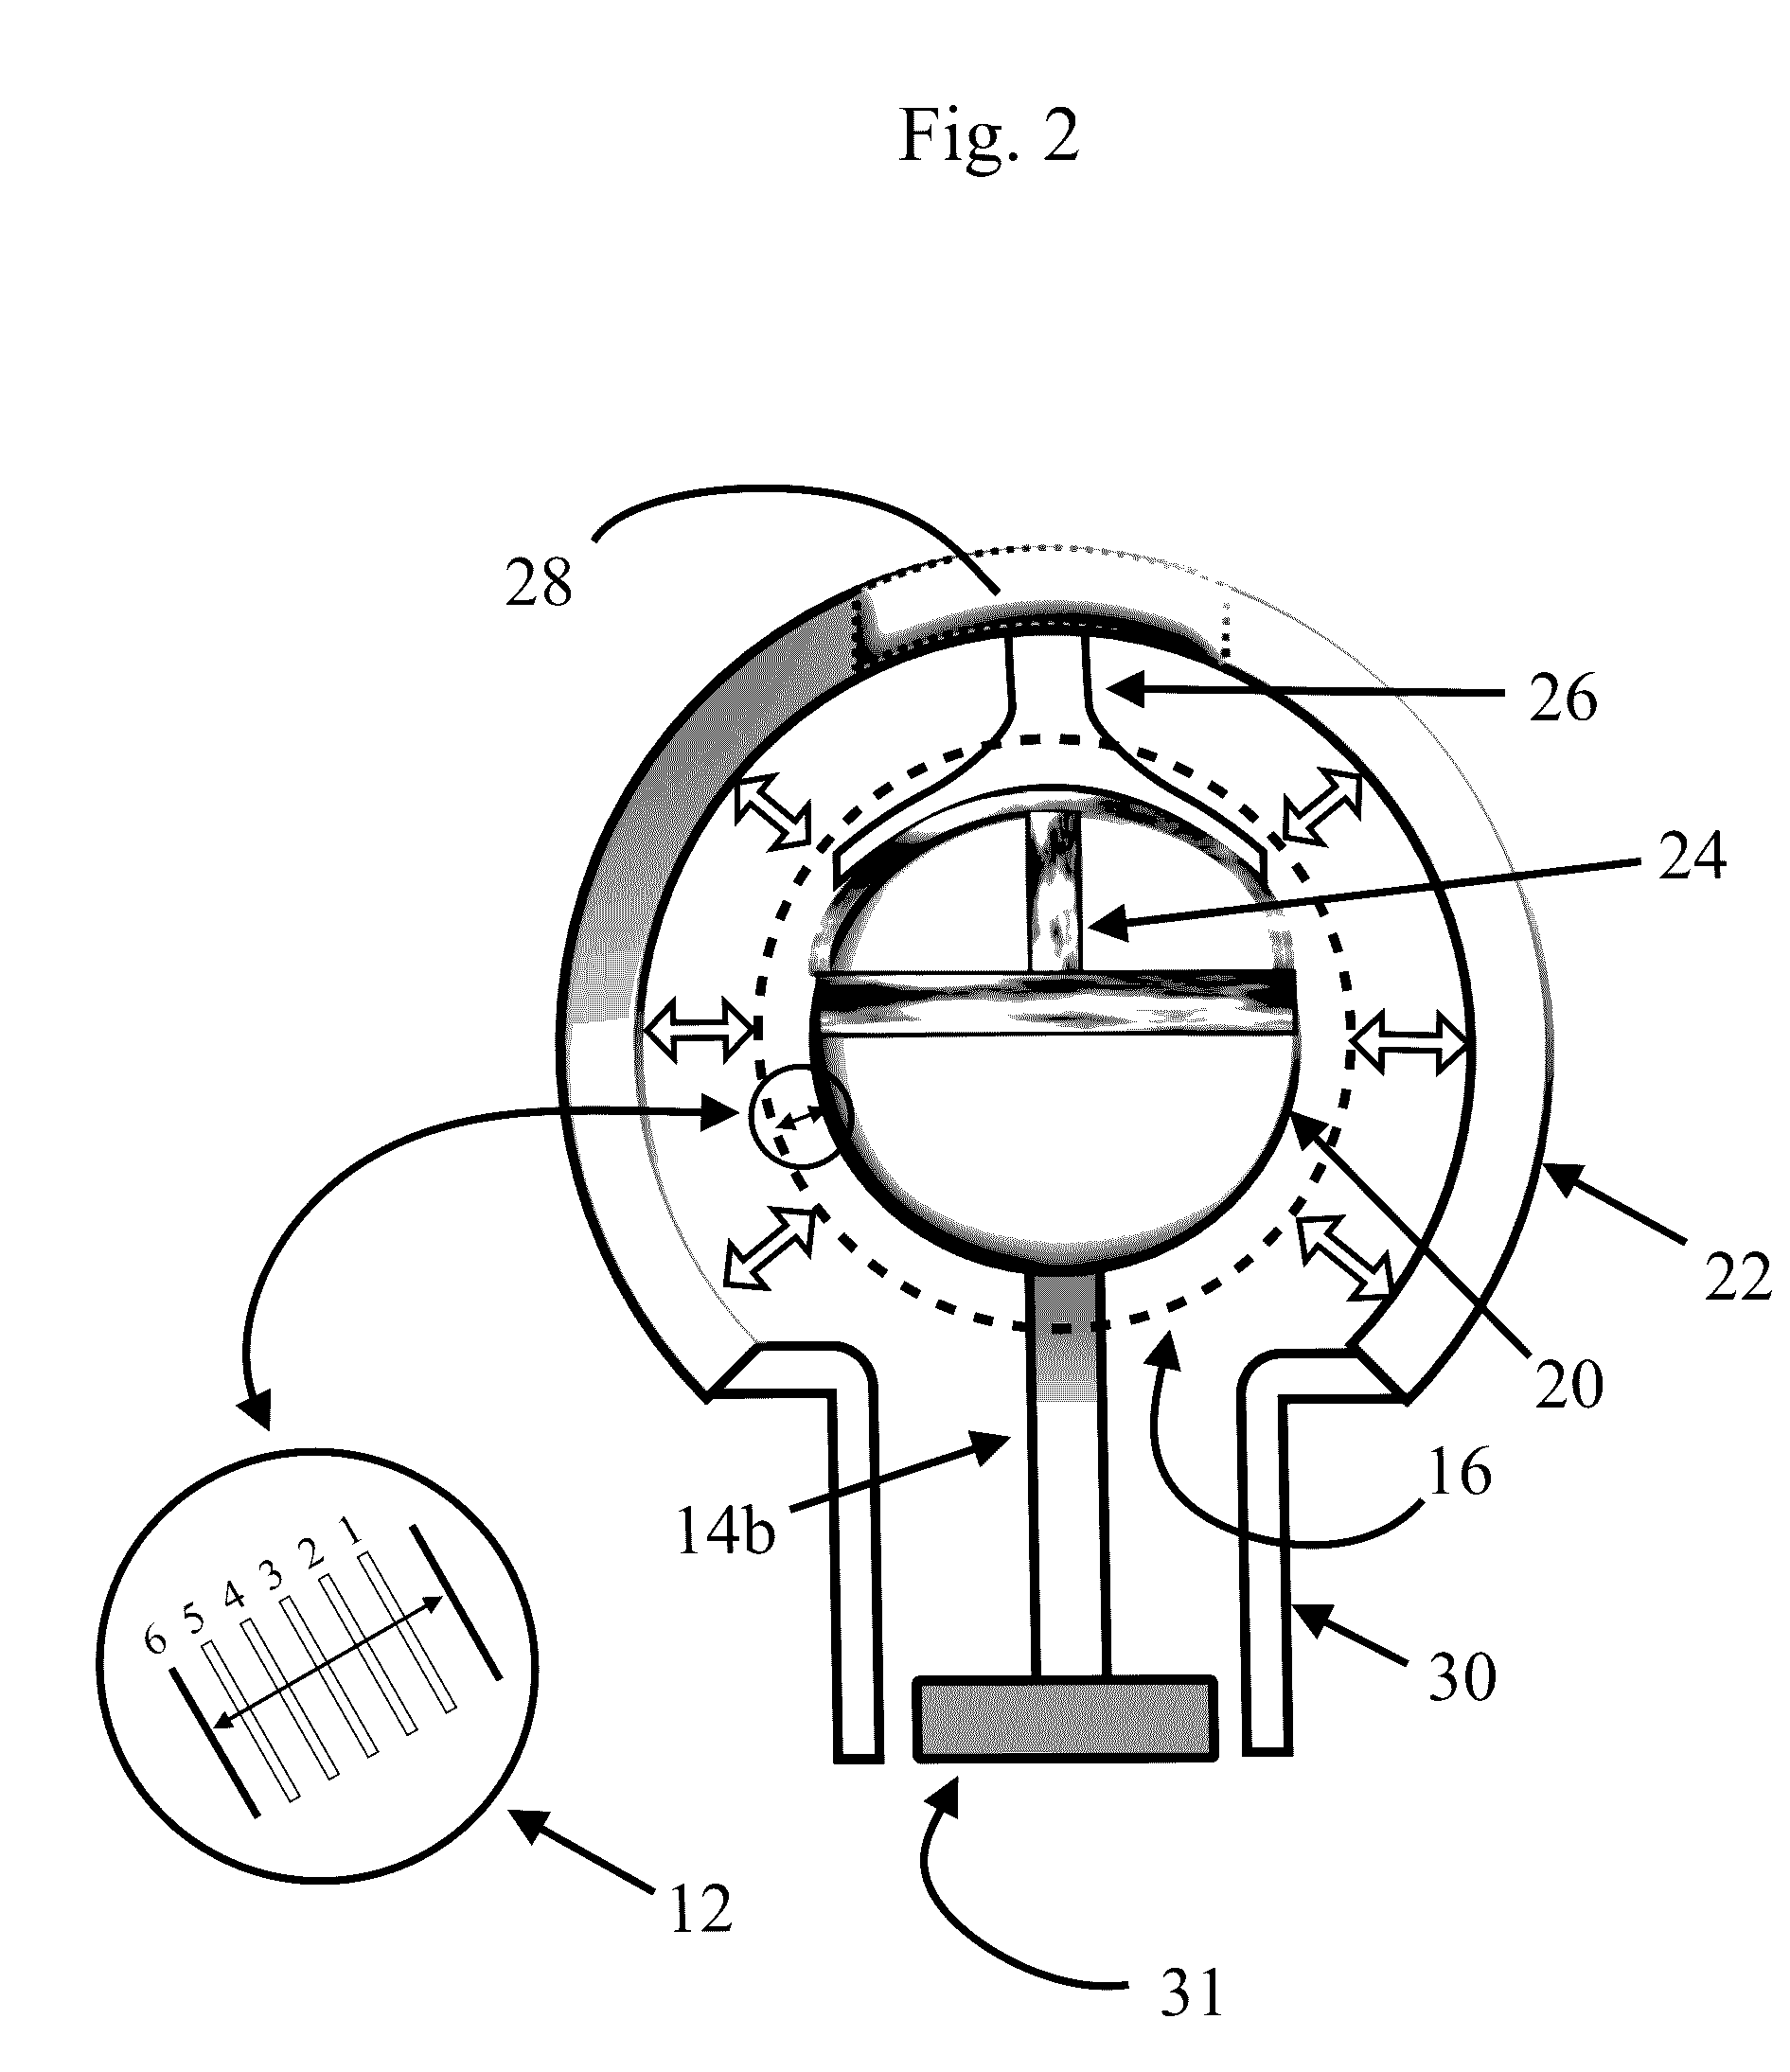 Integrated Head and Neck Tandem-Bracing Device for Protective Helmets